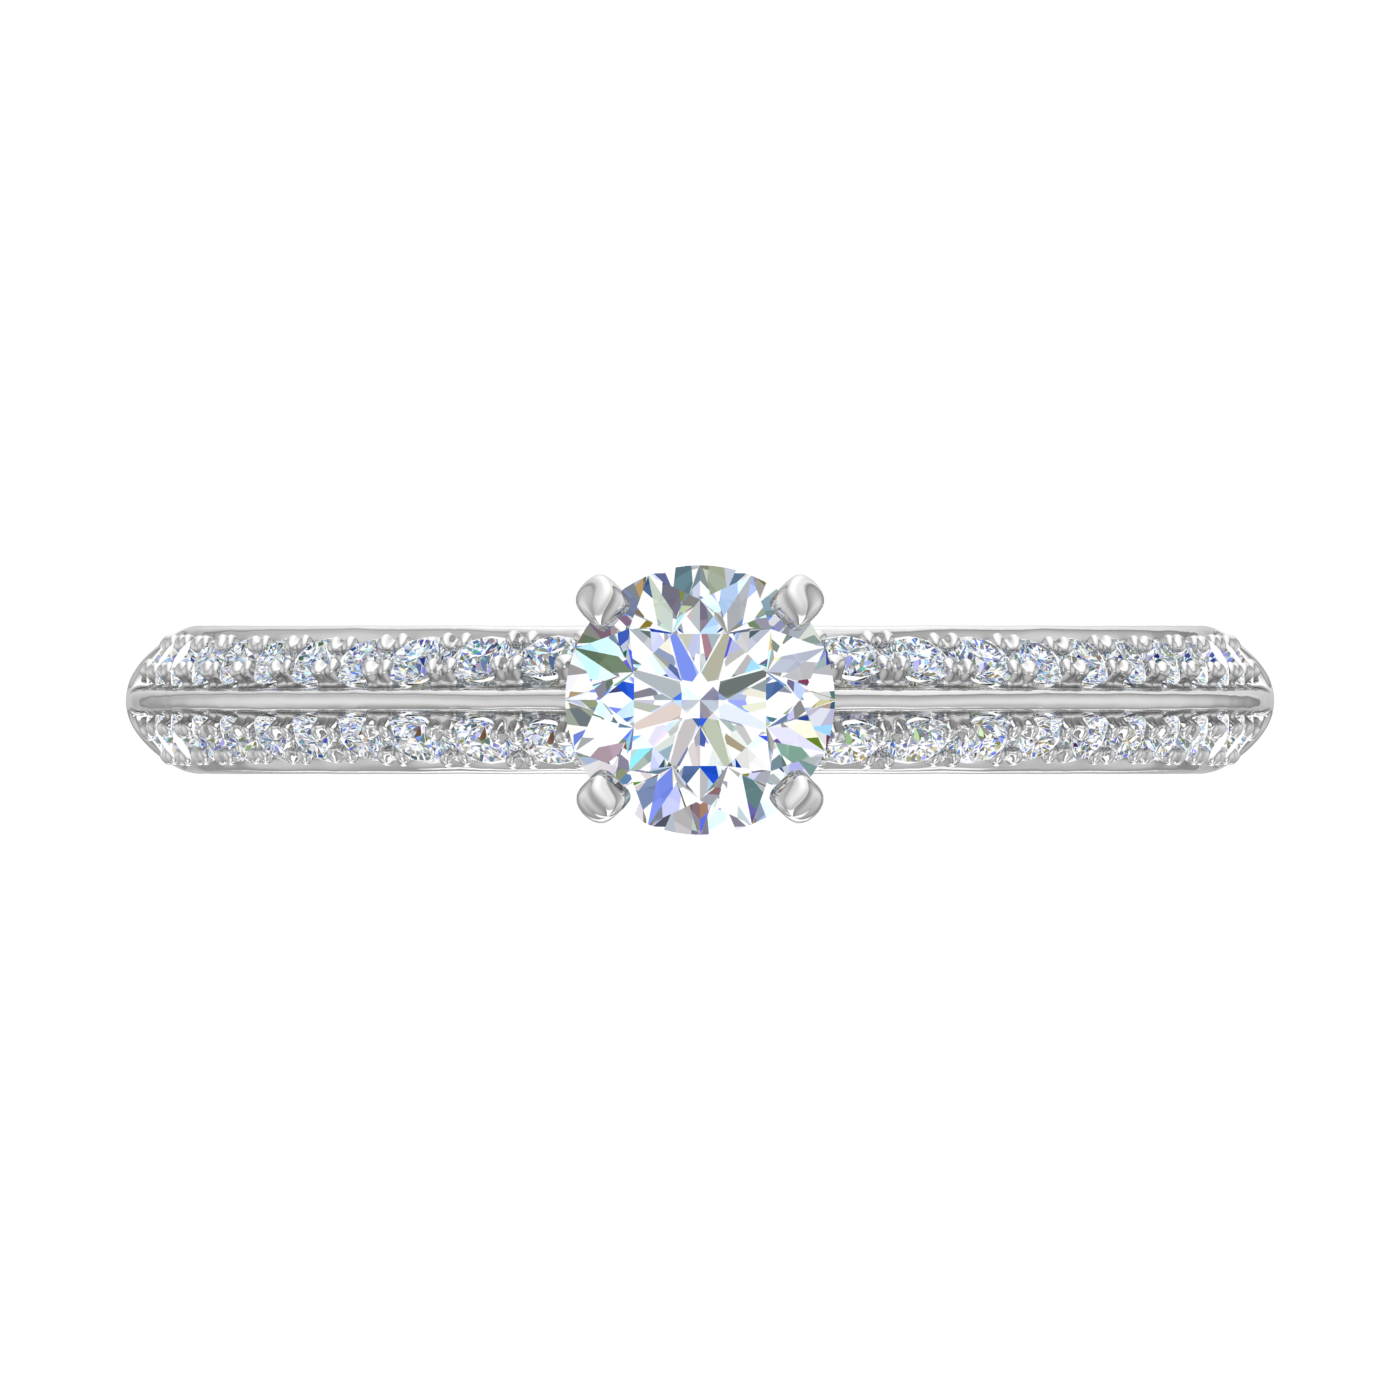 Pre-Owned 1/2 Carat Prong Set Solitaire Diamond Engagement Ring Band in 14K White Gold (Ring Size 7.5) - image 3 of 4